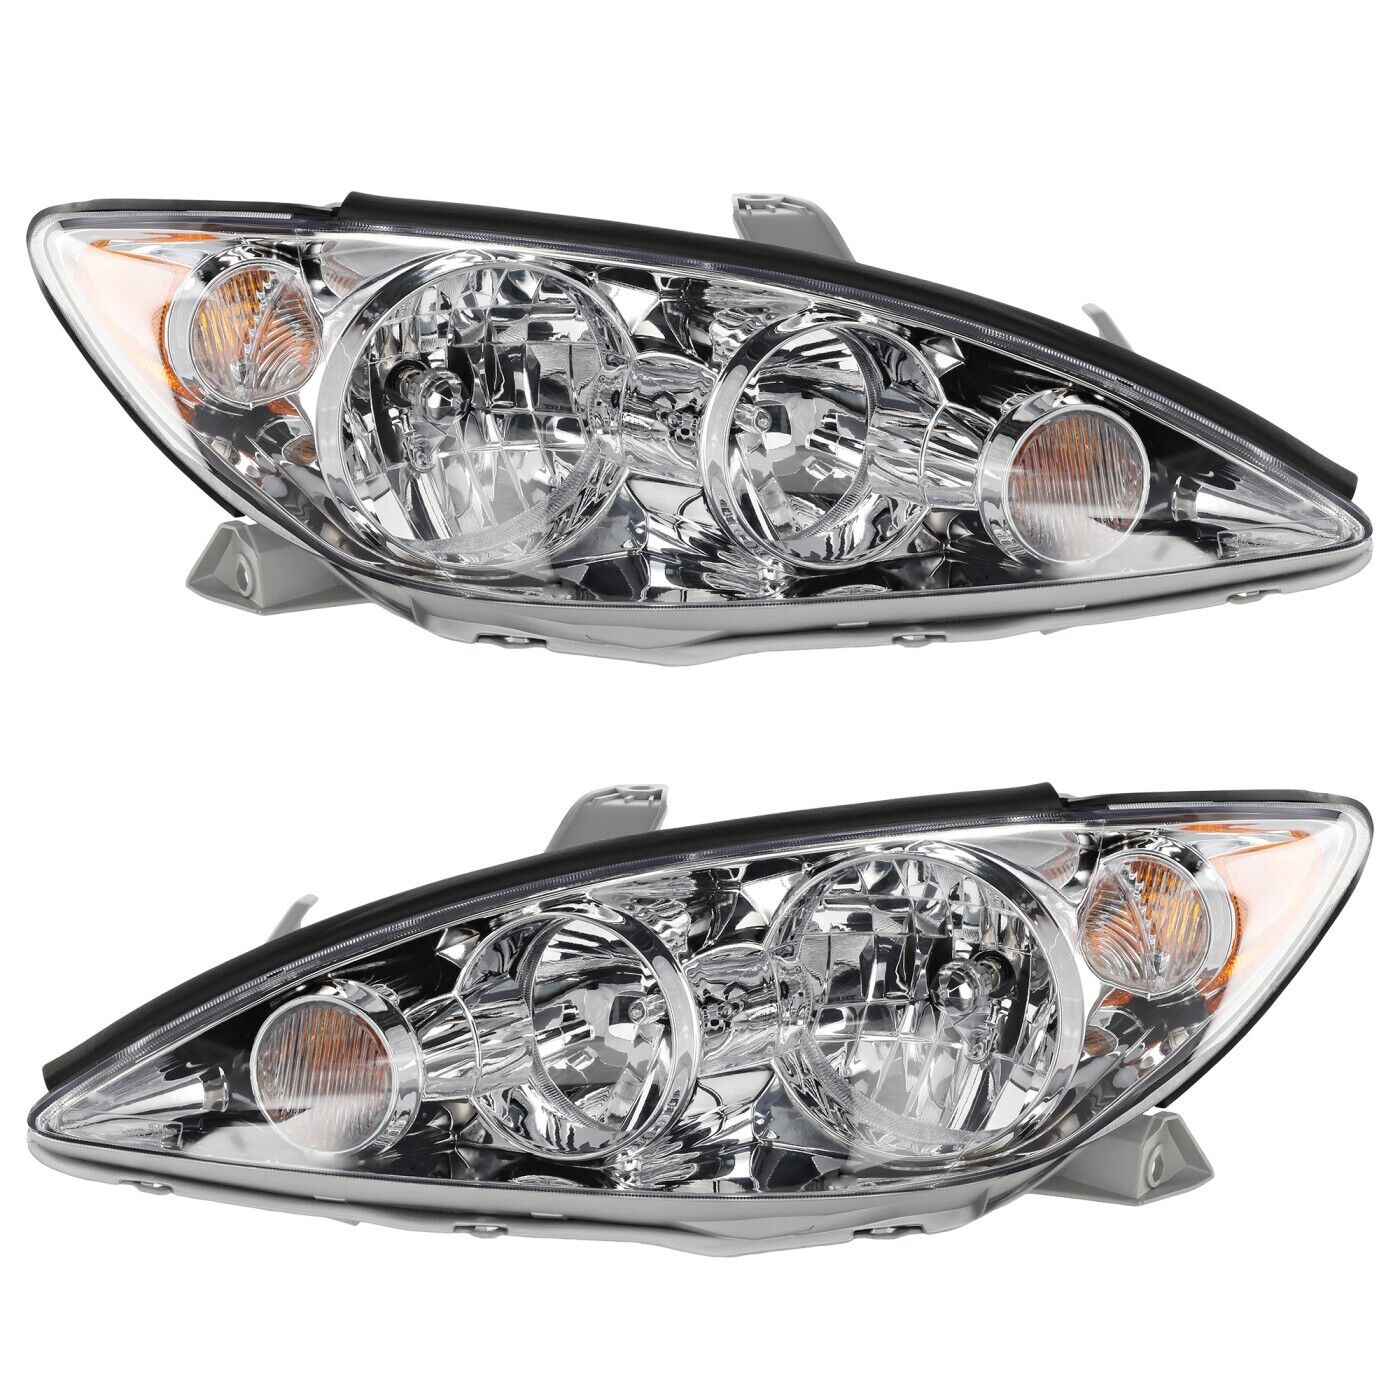 Headlight Set For 2005-2006 Toyota Camry Left and Right Chrome Housing 2Pc